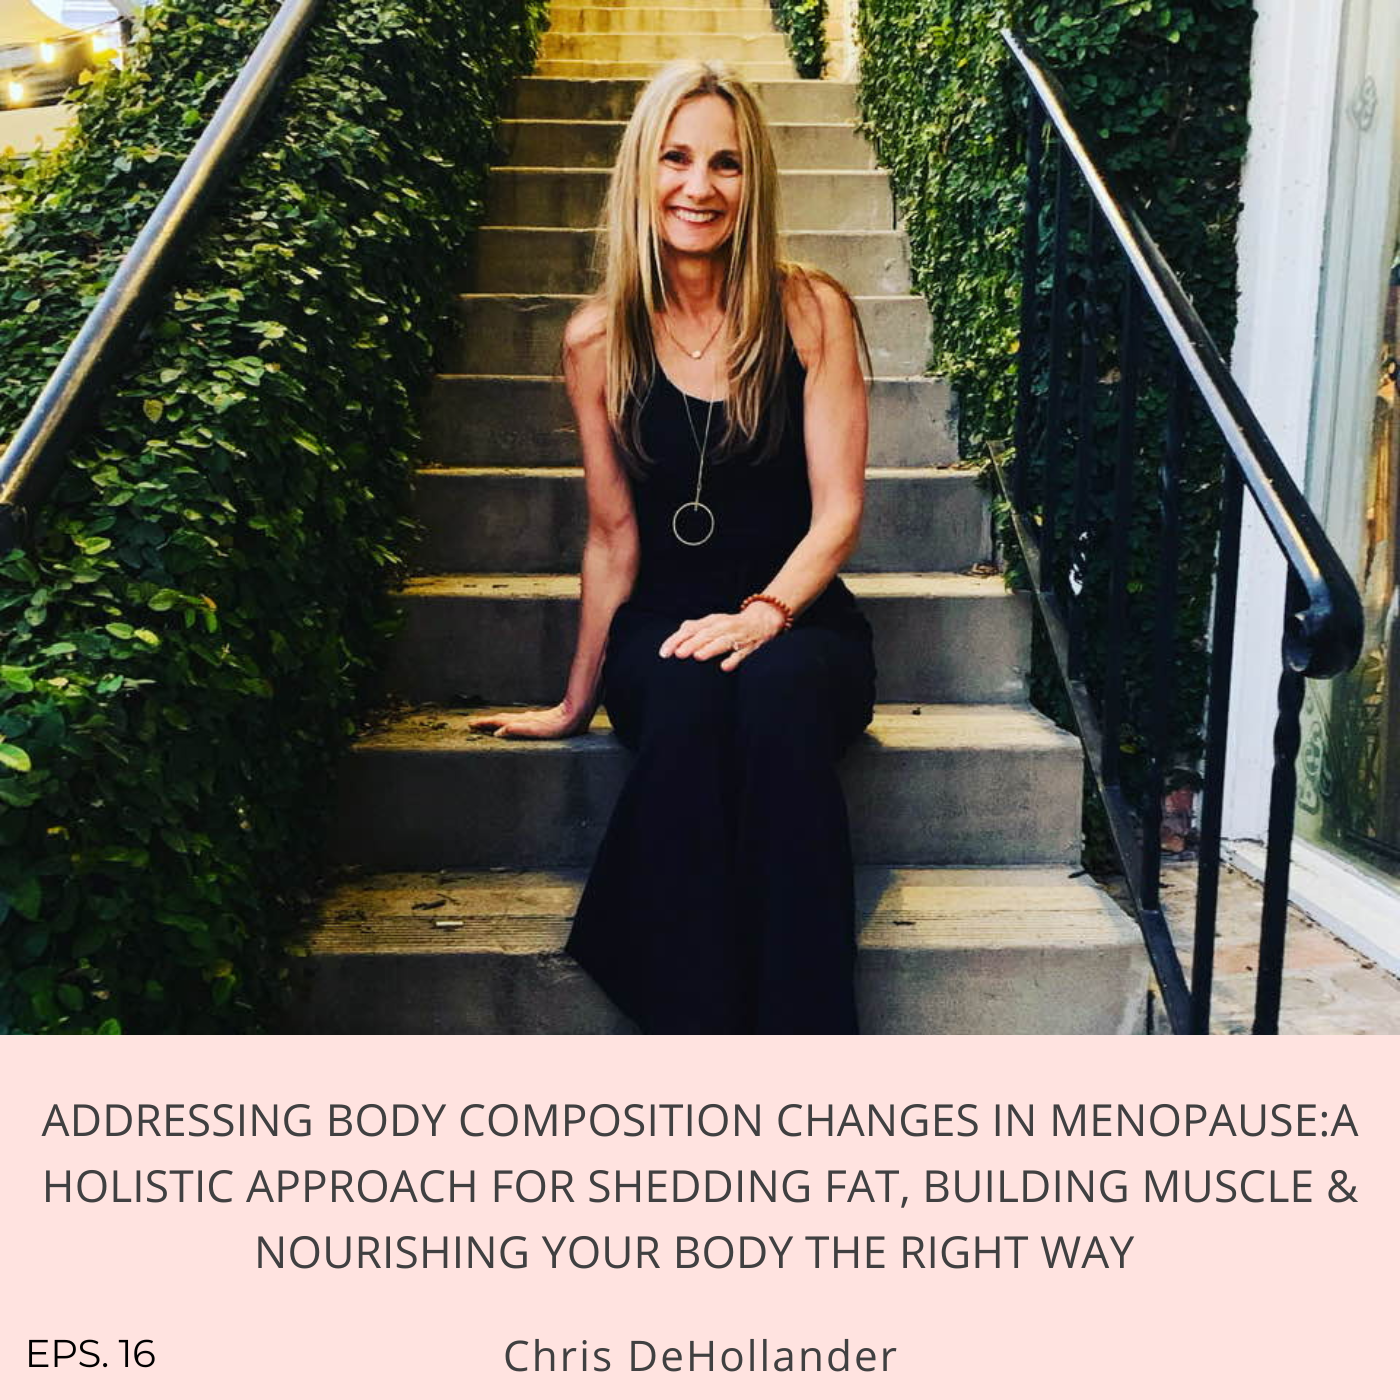 Episode 16:Addressing body composition changes in menopause: A holistic approach for shedding fat, building muscle & nourishing your body the right way